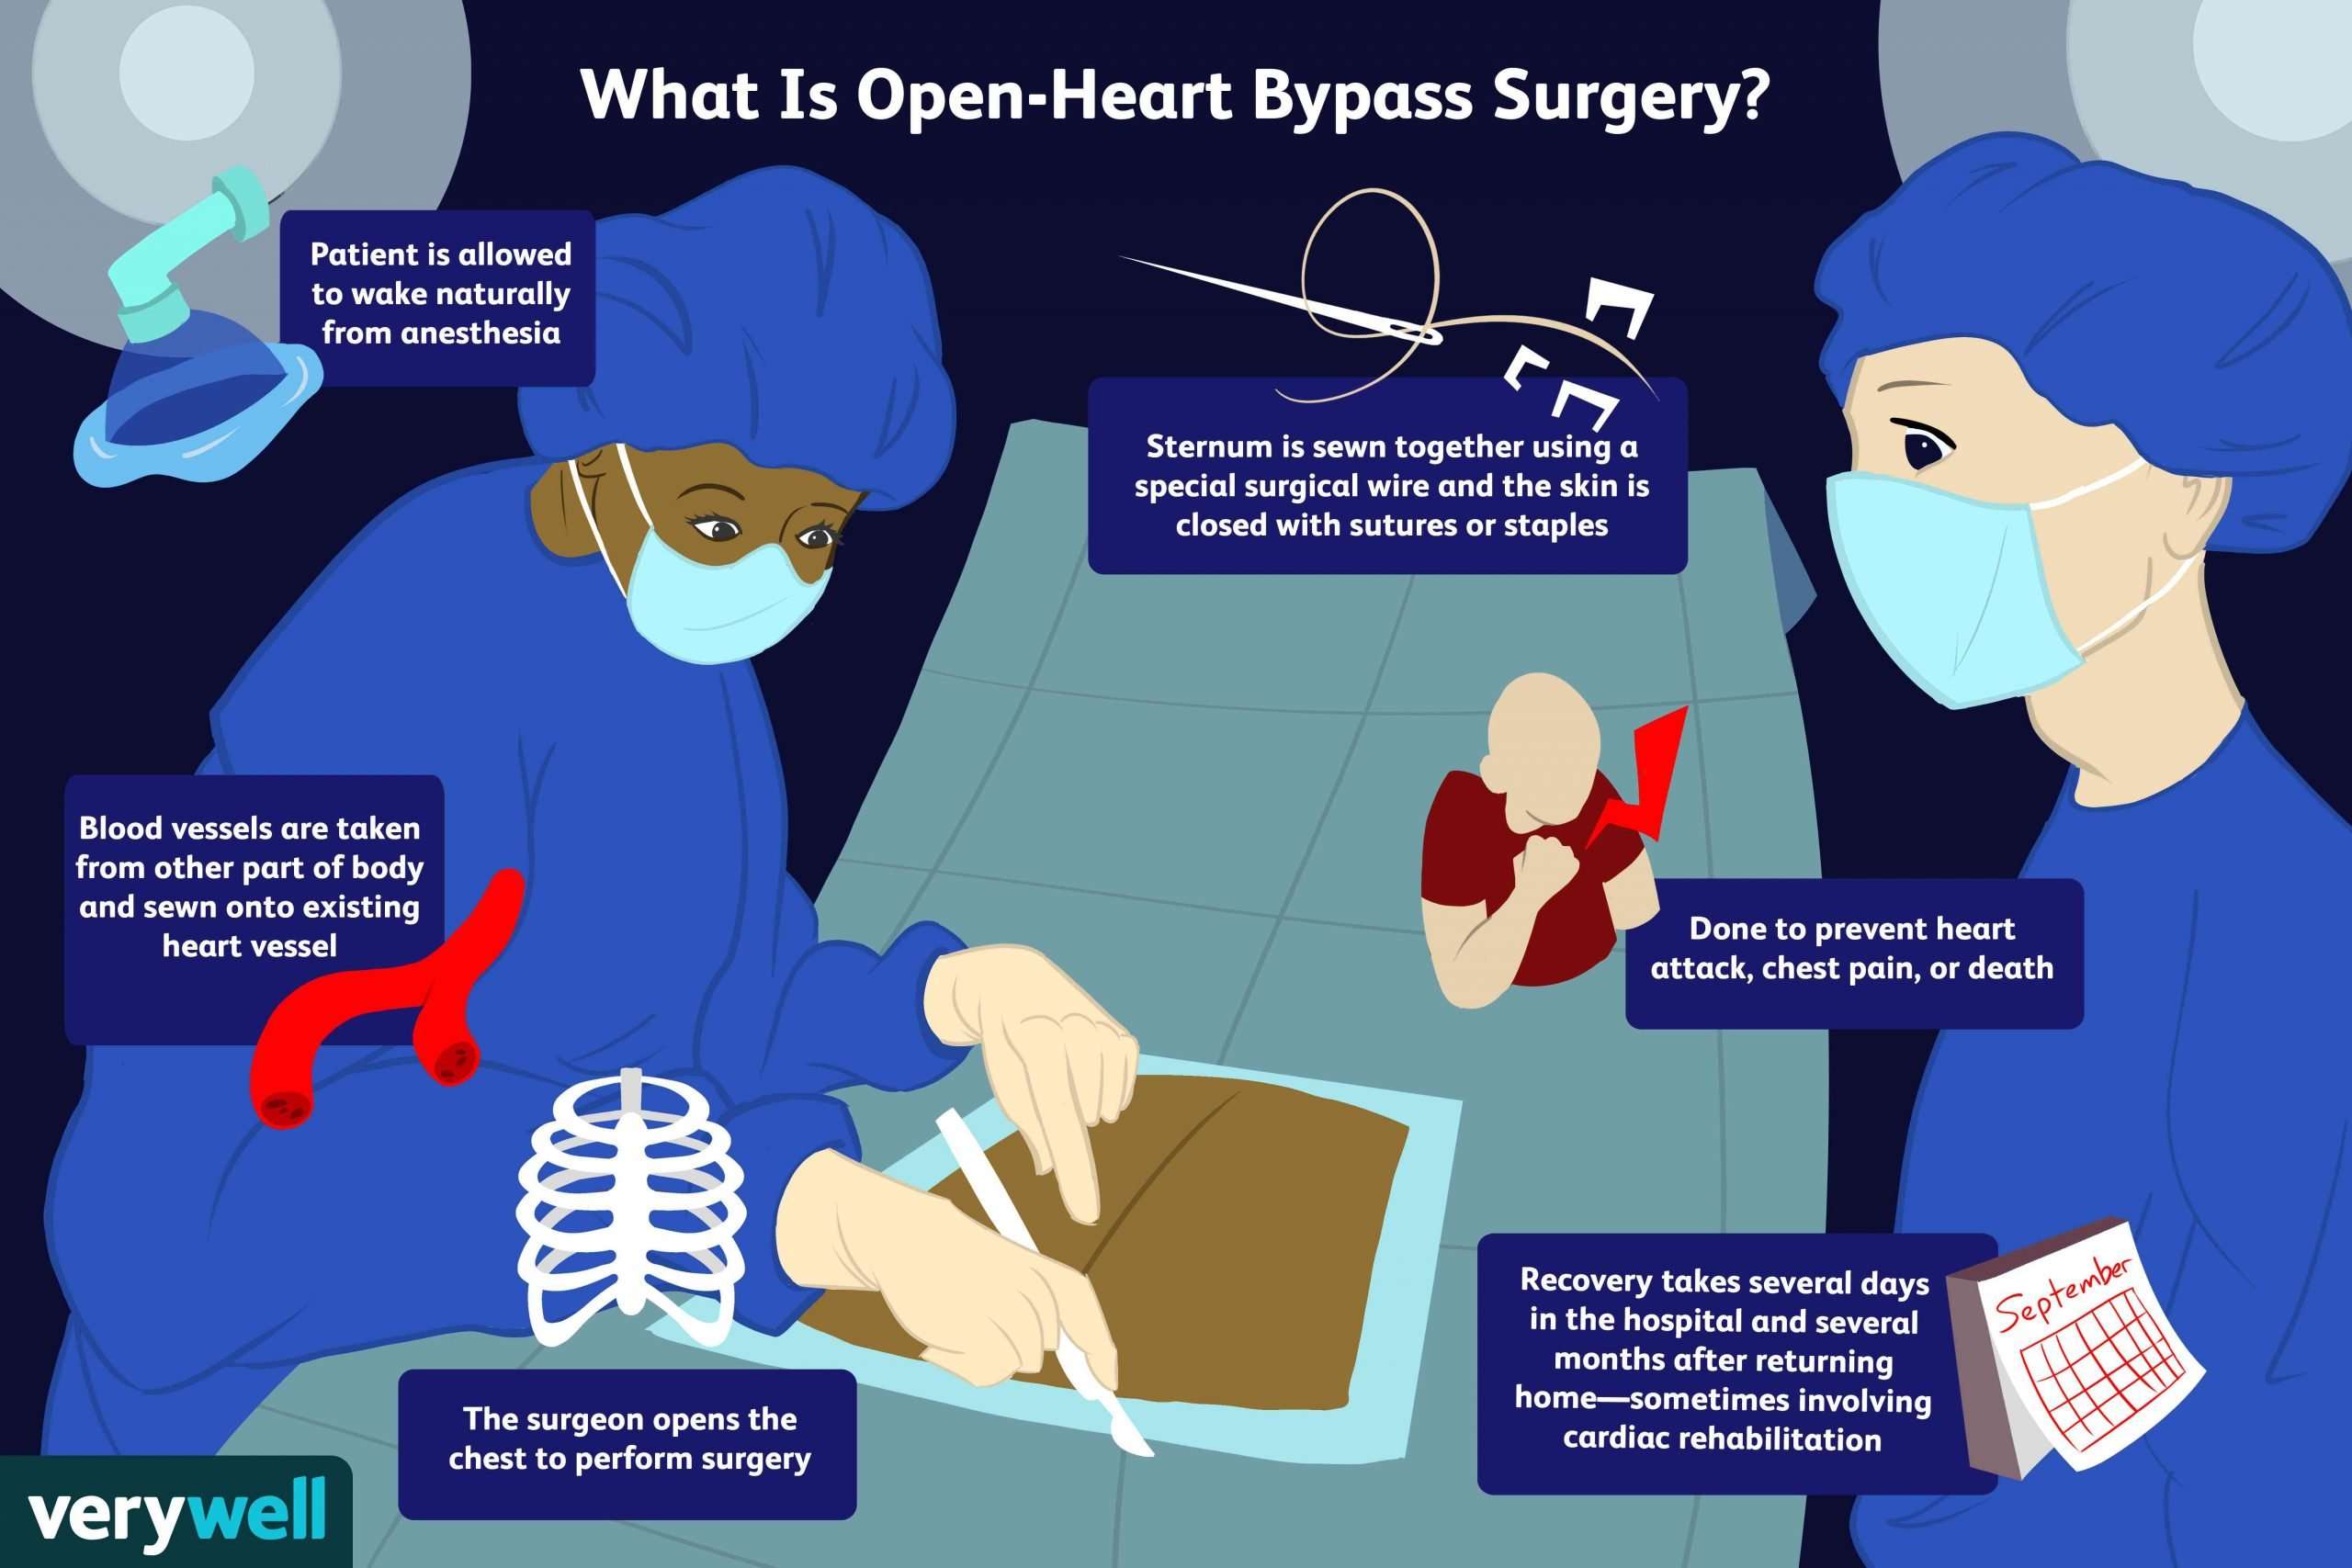 Heart Bypass Surgery: Preparation, Recovery, Long